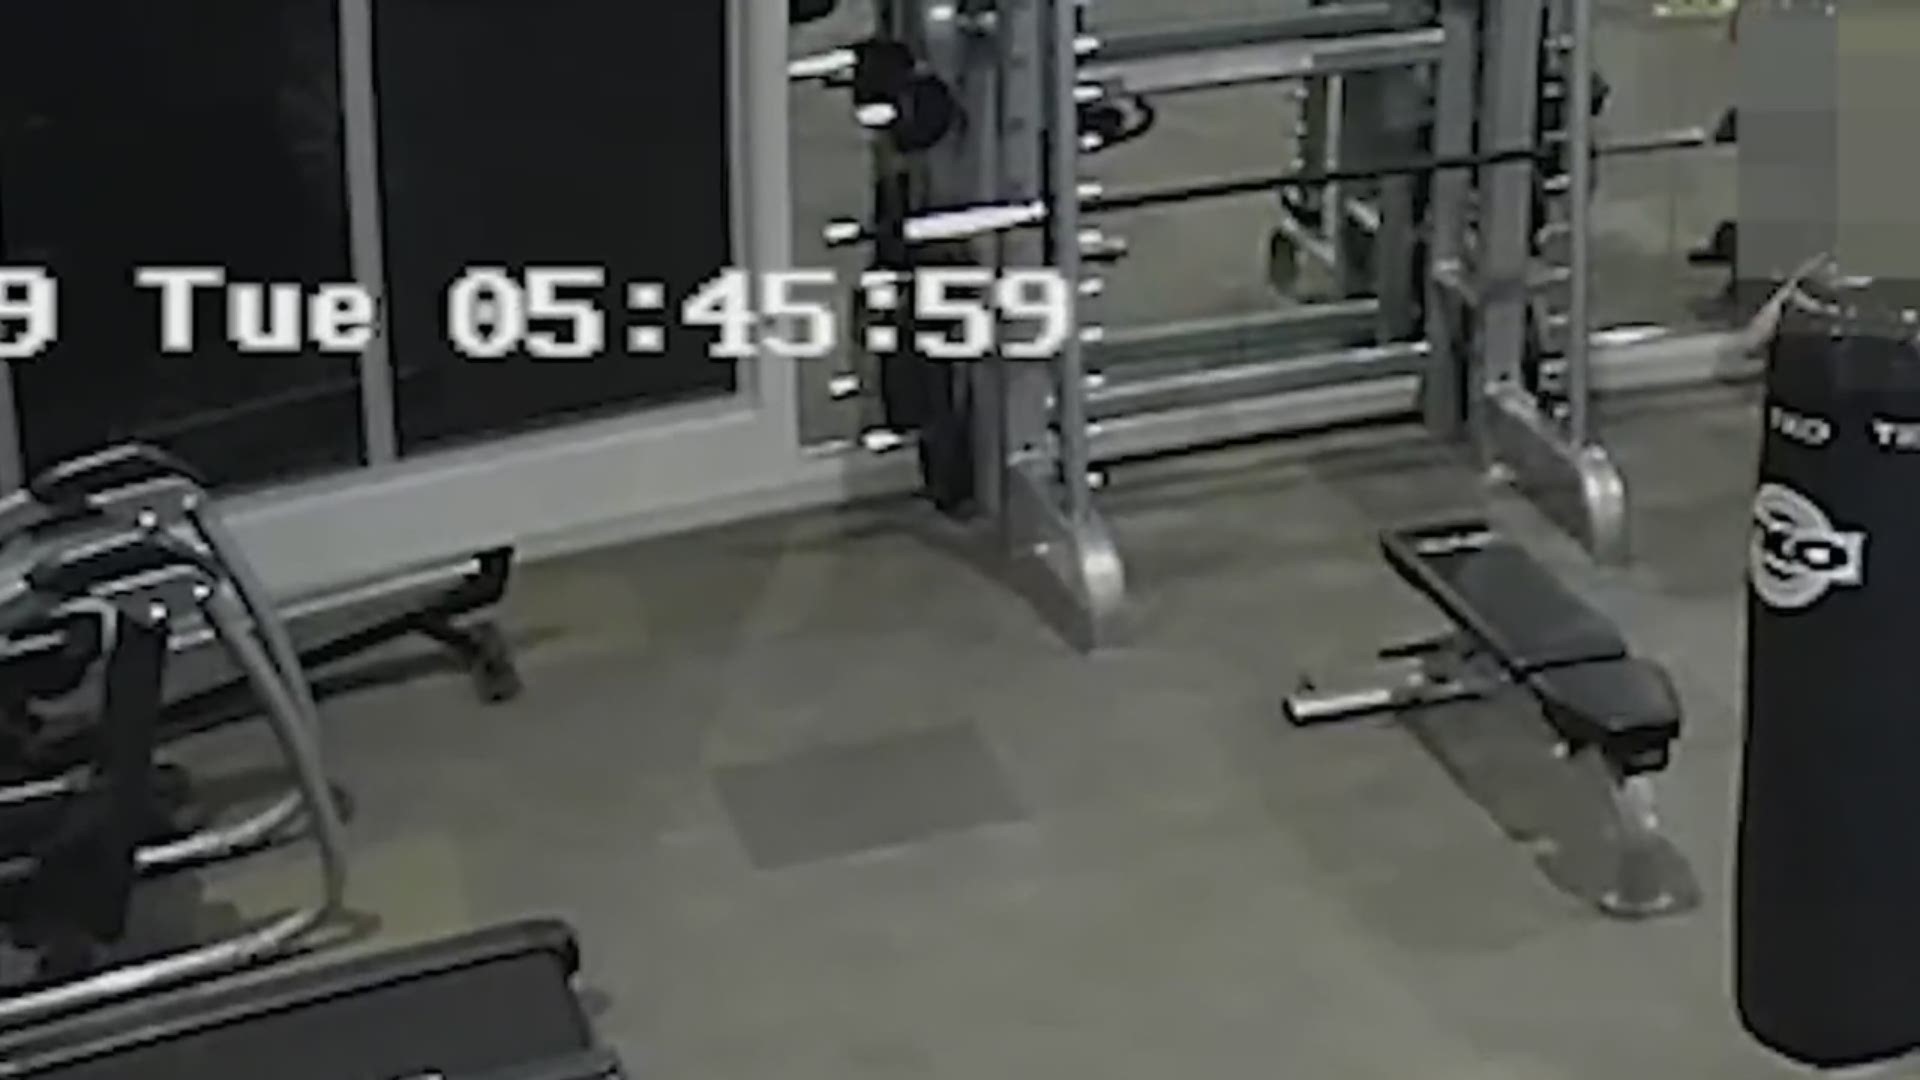 A woman fought off an attacker after she left a fitness center, and deputies are looking for a suspect, the Sarasota County Sheriff's Office said.